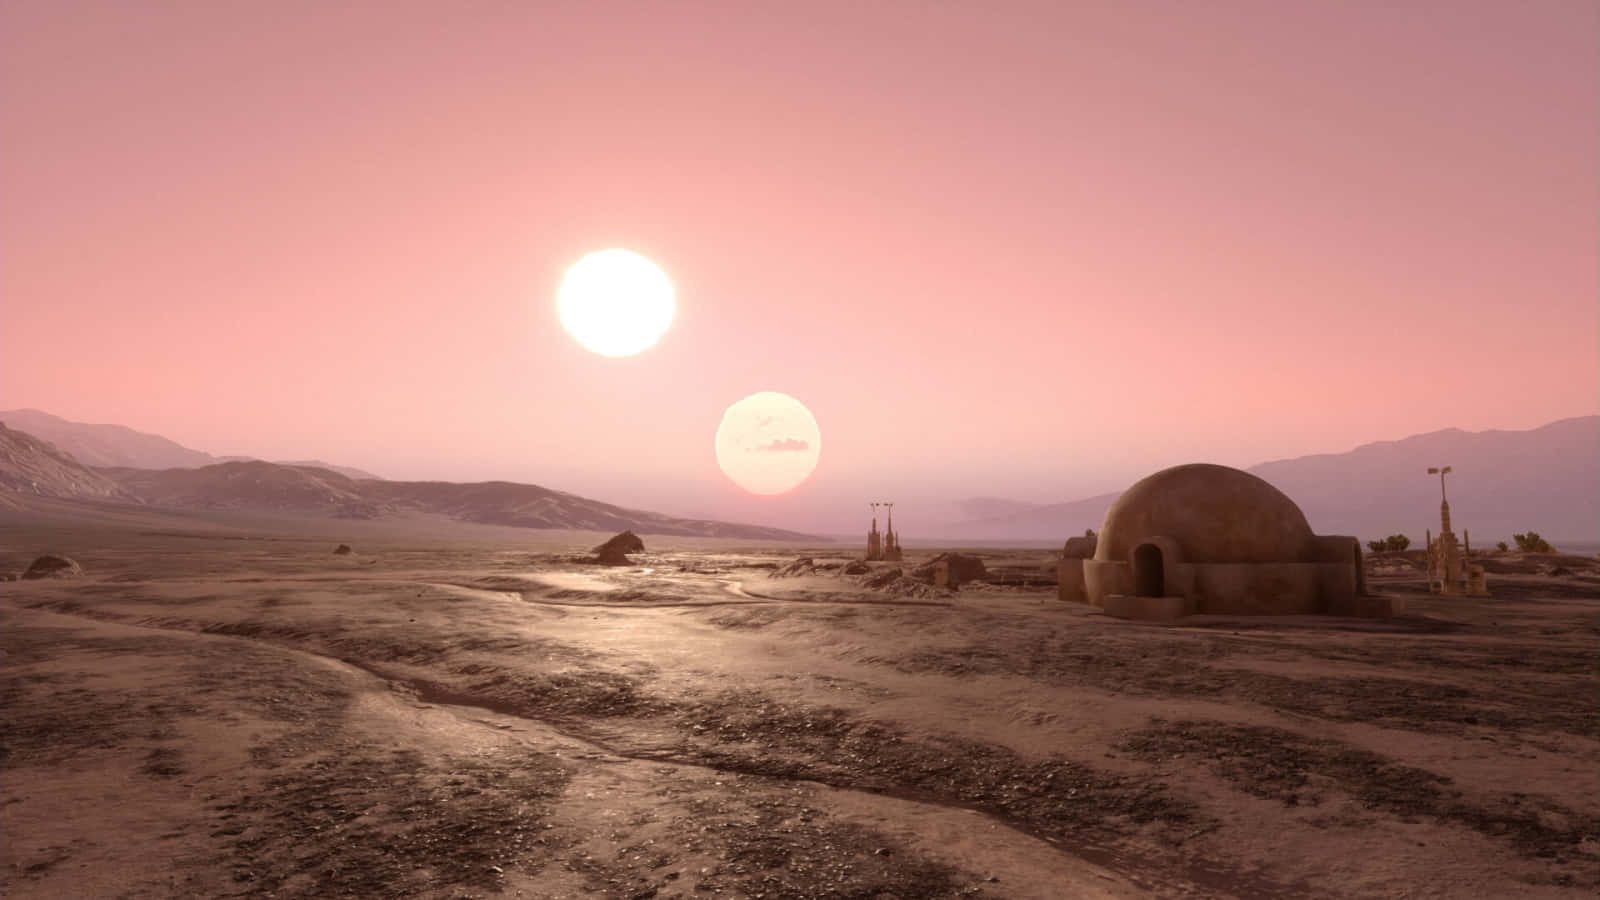 In the middle of Tatooine's Desert lies a battleground of courage and adventure." Wallpaper